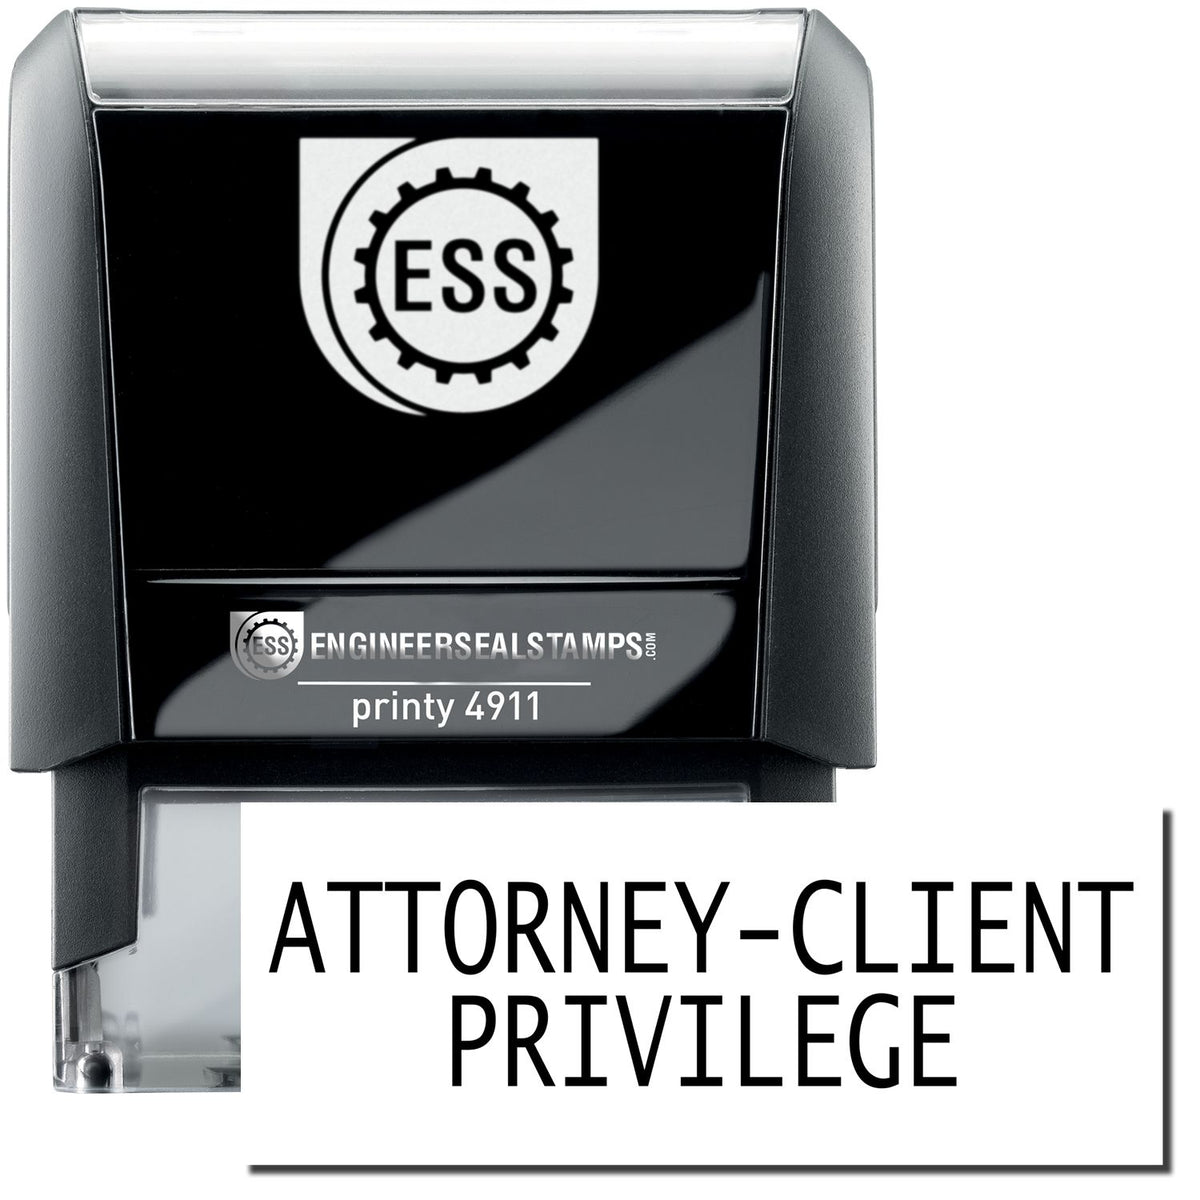 A self-inking stamp with a stamped image showing how the text &quot;ATTORNEY-CLIENT PRIVILEGE&quot; is displayed after stamping.